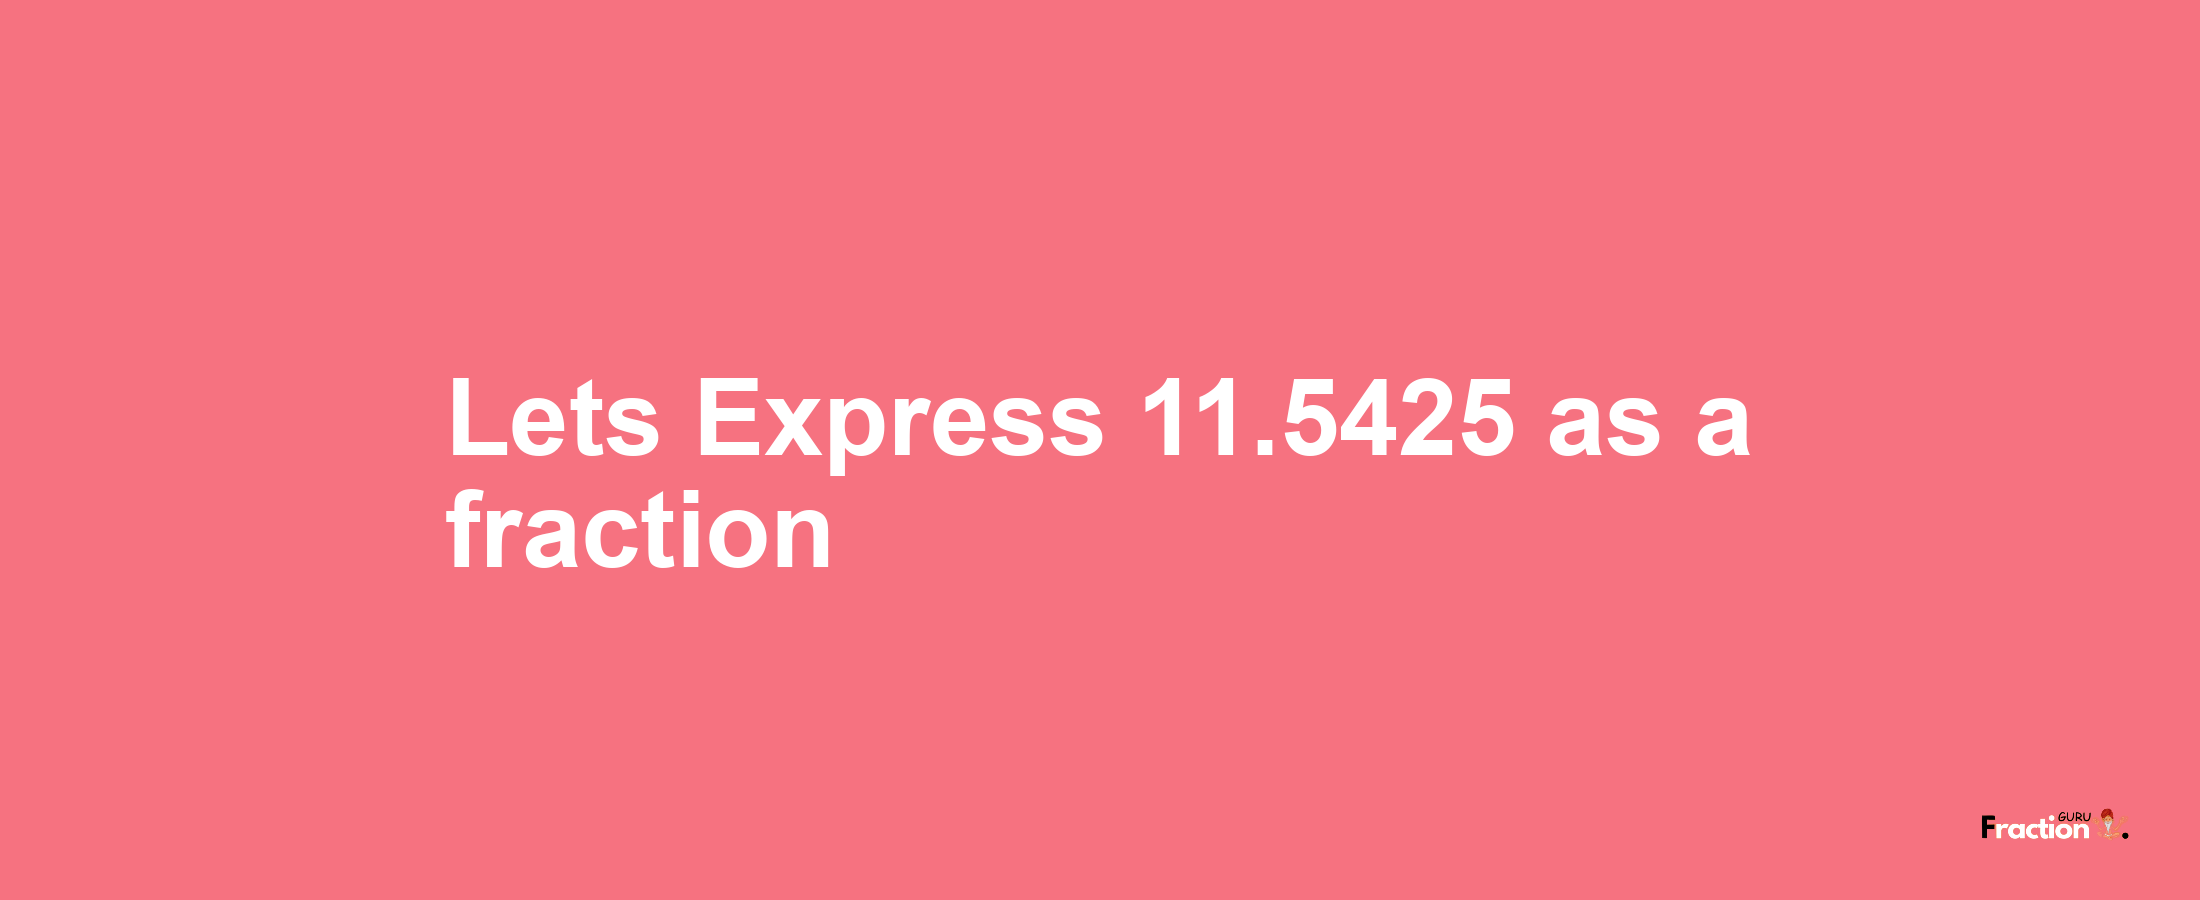 Lets Express 11.5425 as afraction